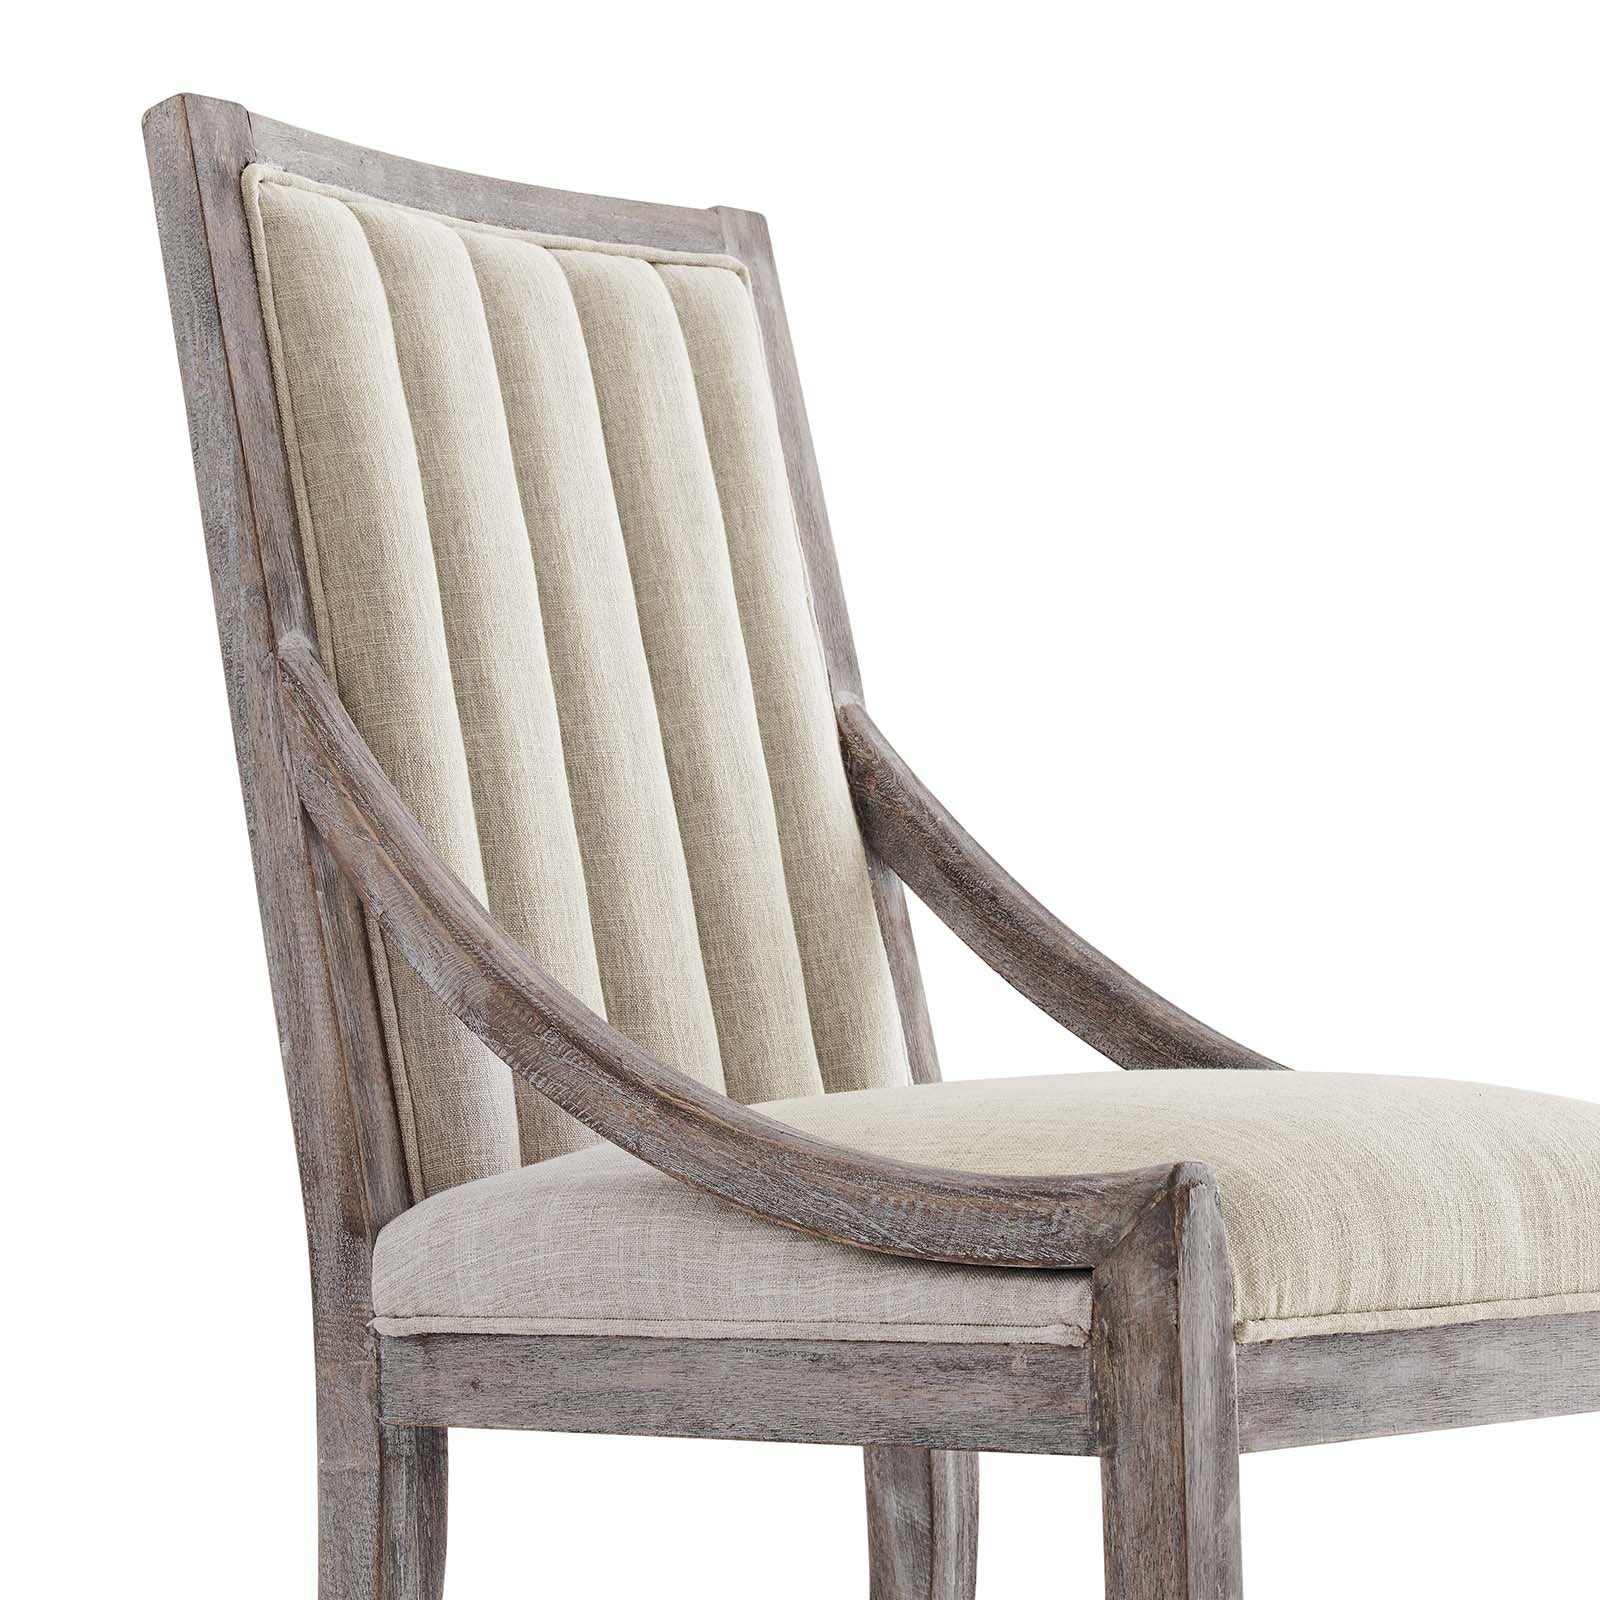 Maison French Vintage Tufted Fabric Dining Armchairs Set of 2 - East Shore Modern Home Furnishings